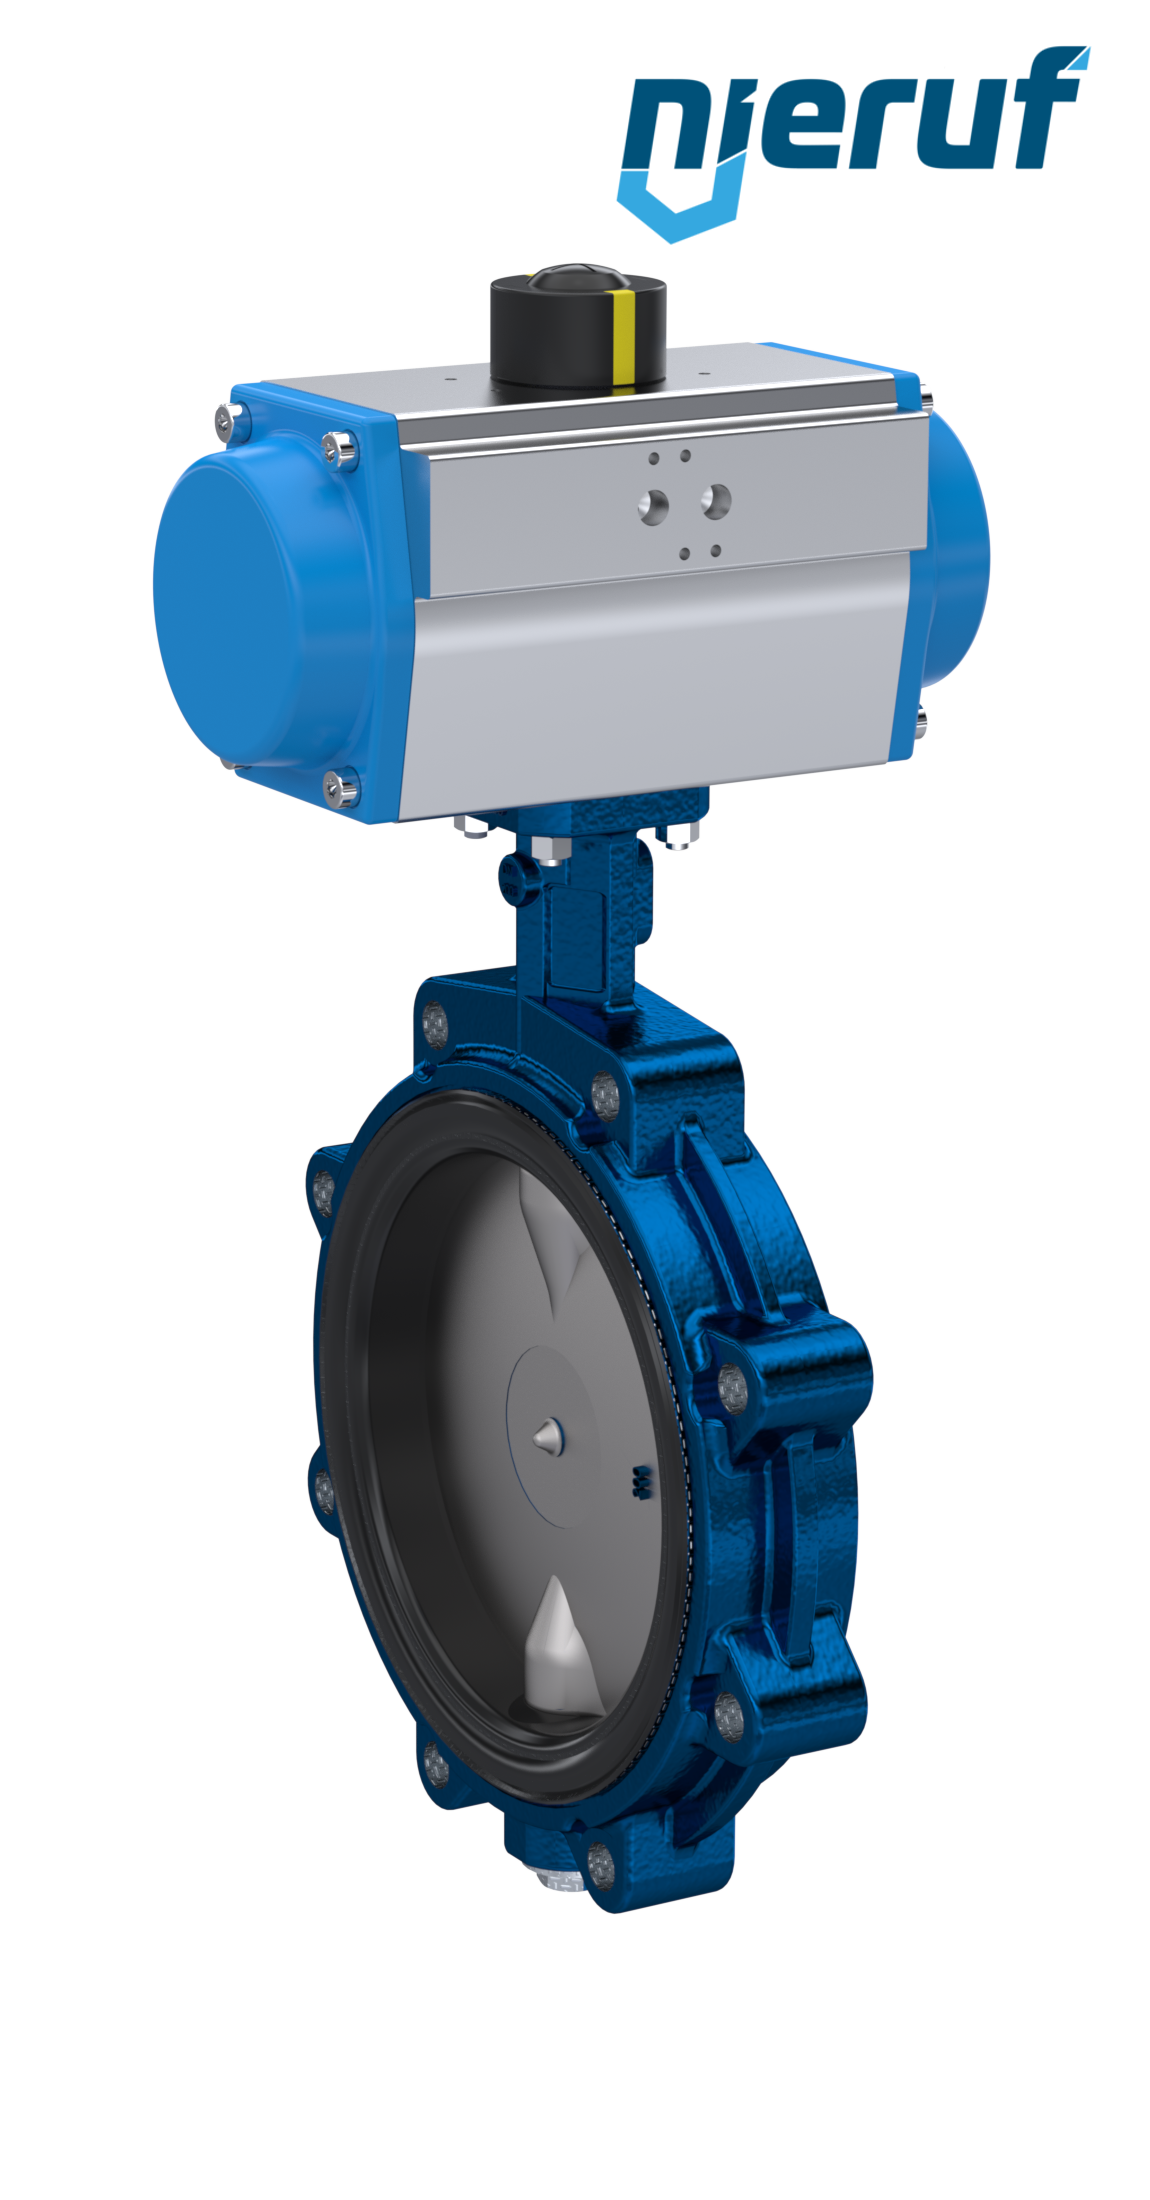 Butterfly valve DN 200 AK02 EPDM DVGW drinking water, WRAS, ACS, W270 pneumatic actuator double acting